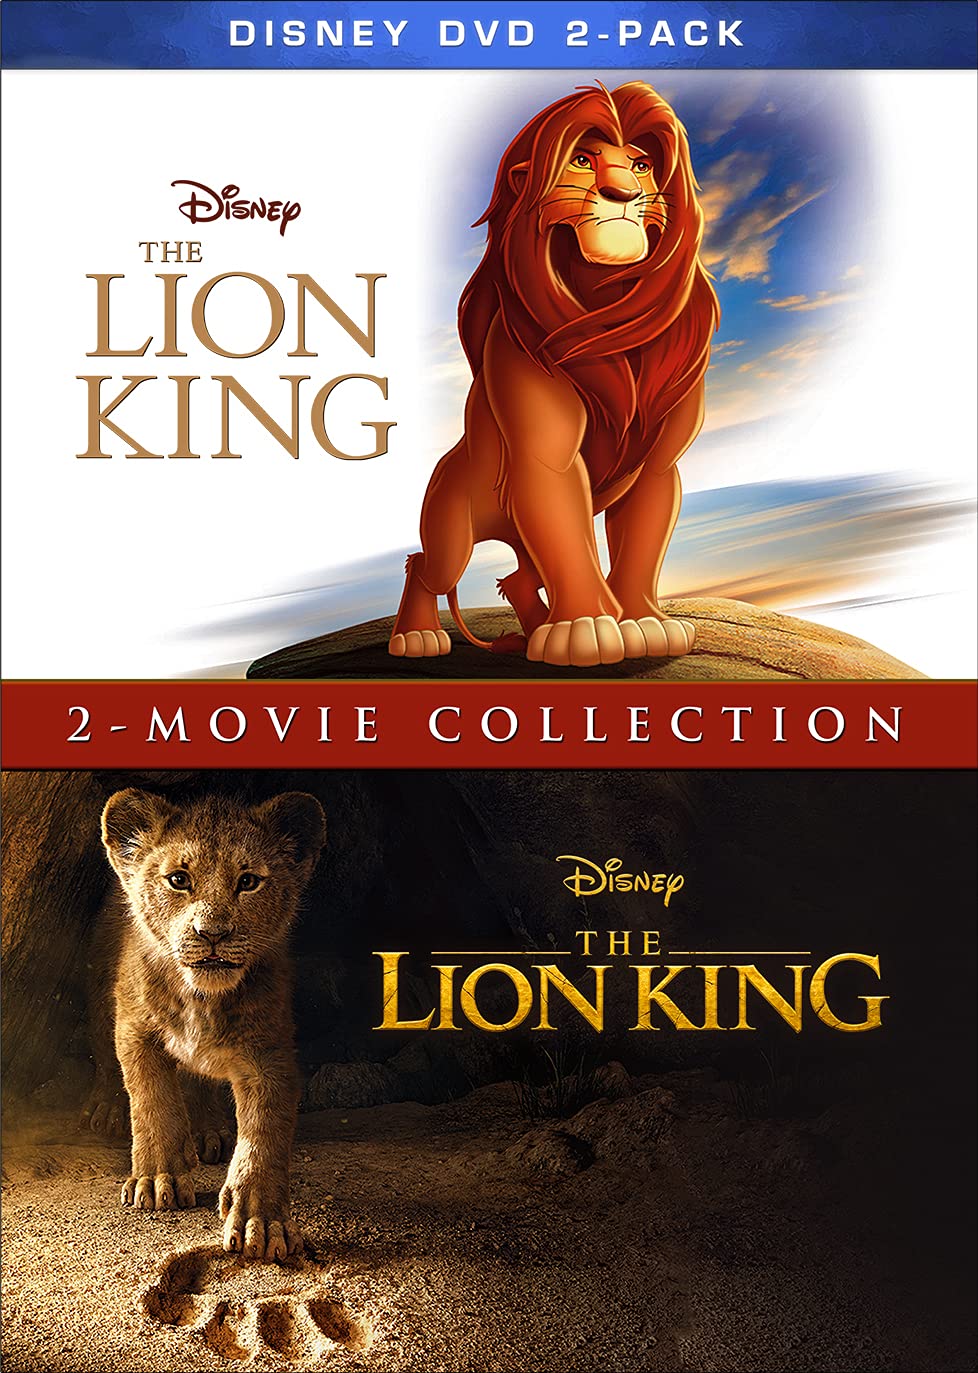 THE LION KING 2-MOVIE COLLECTION